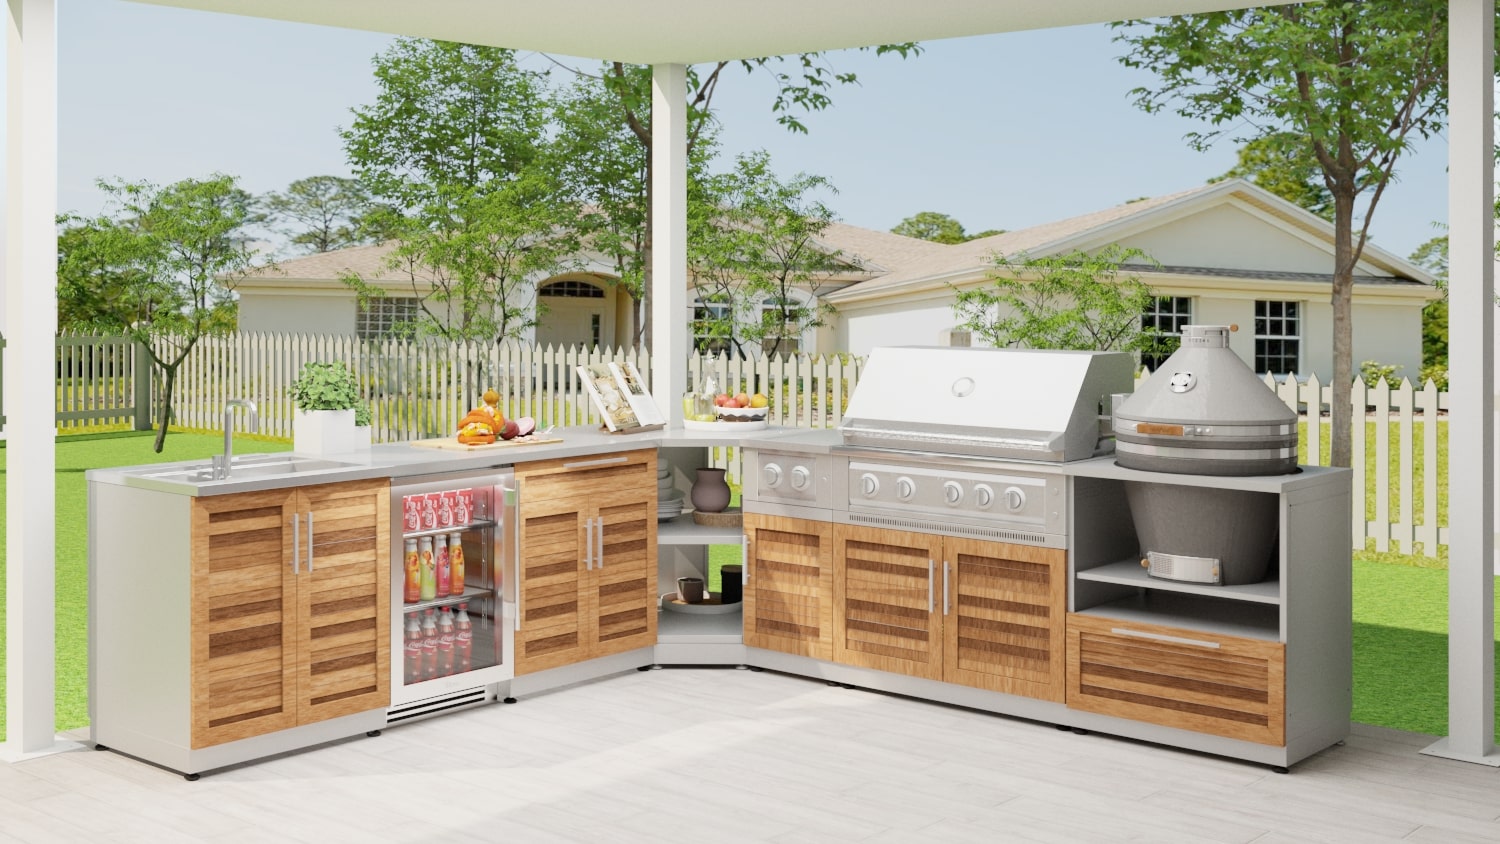 3D Rendering of L-Shaped Outdoor Kitchen Layout. Design by NewAge.